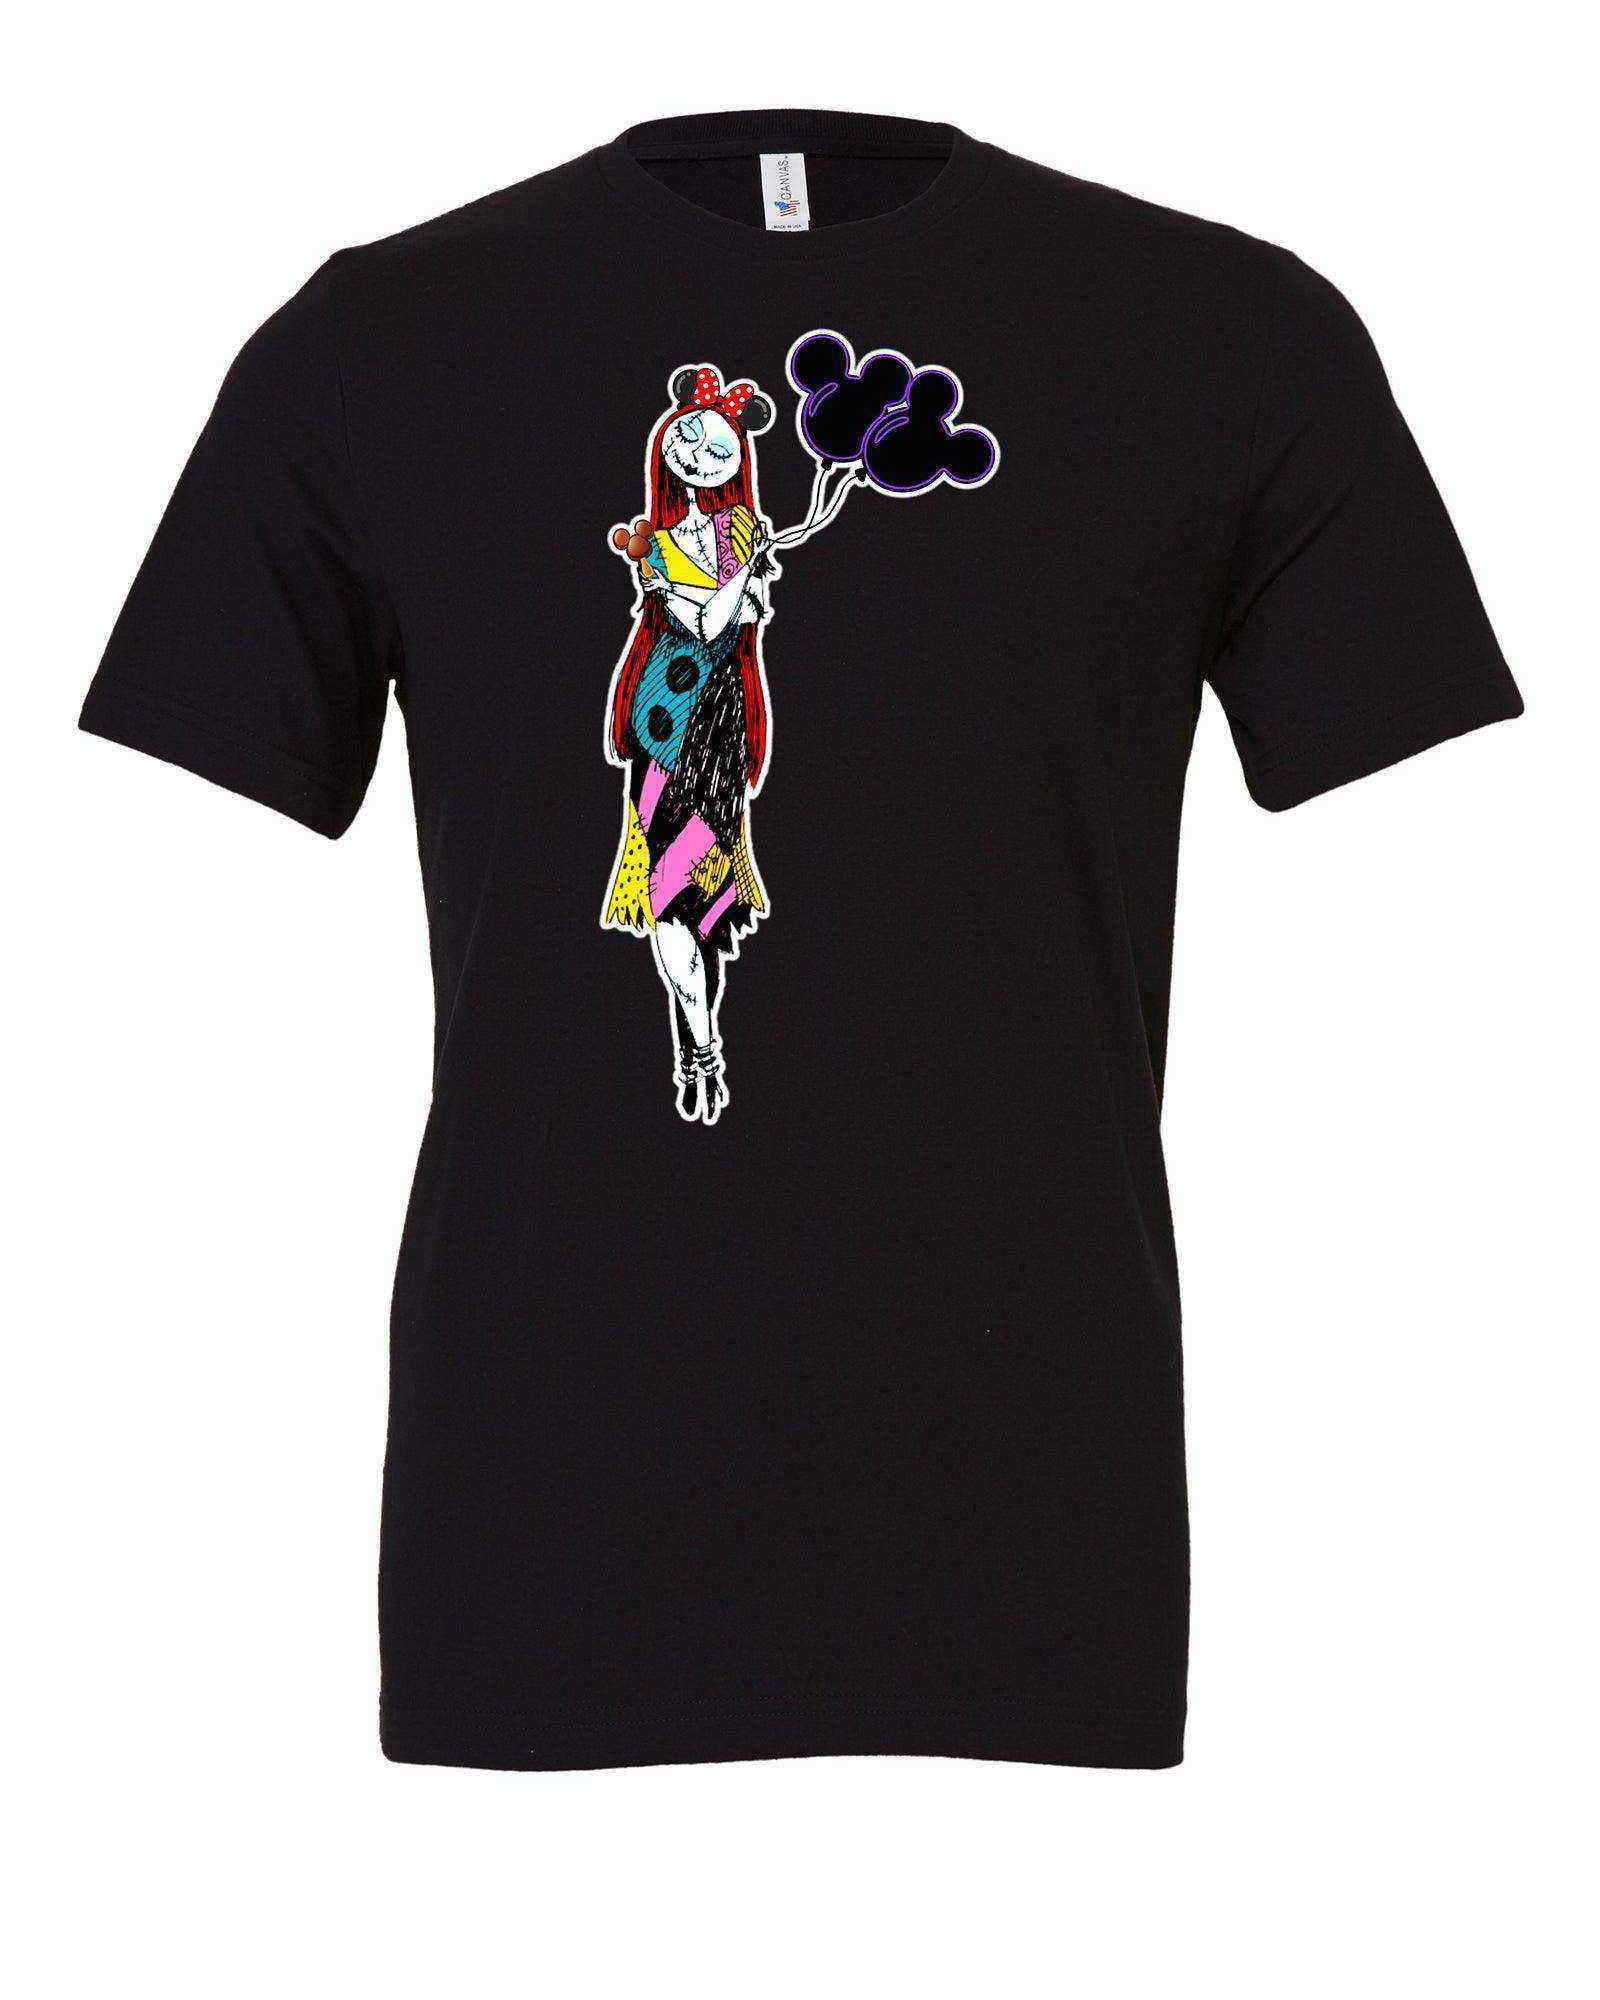 Toddler | Park Hopping Sally Shirt | Nightmare Before Christmas - Dylan's Tees